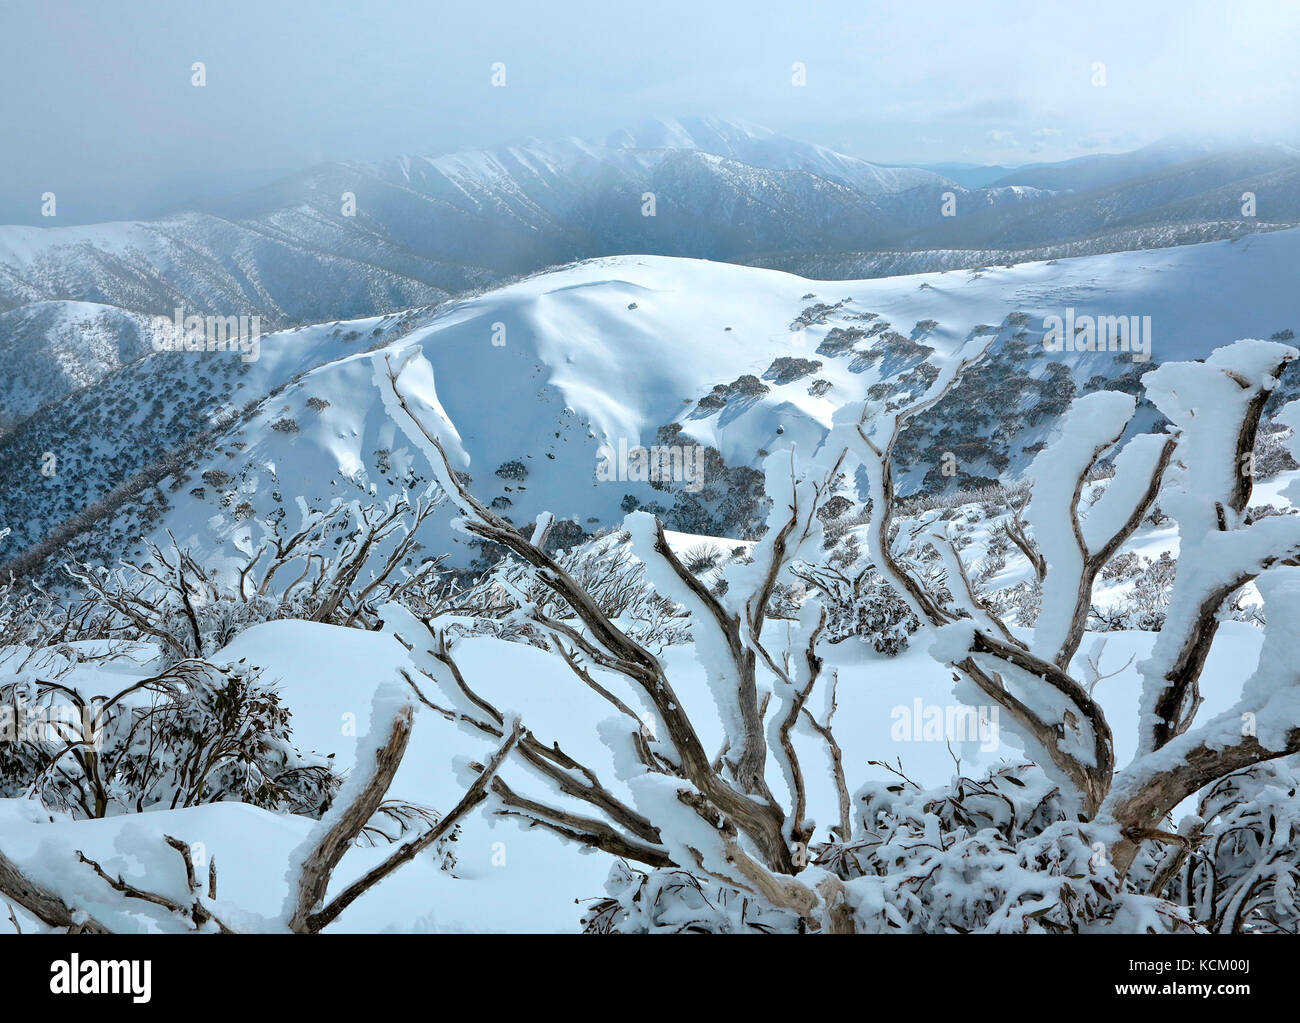 Early morning view of mountains in the Mount Hotham snowfields. Victorian Alps, northeastern Victoria, Australia Stock Photo